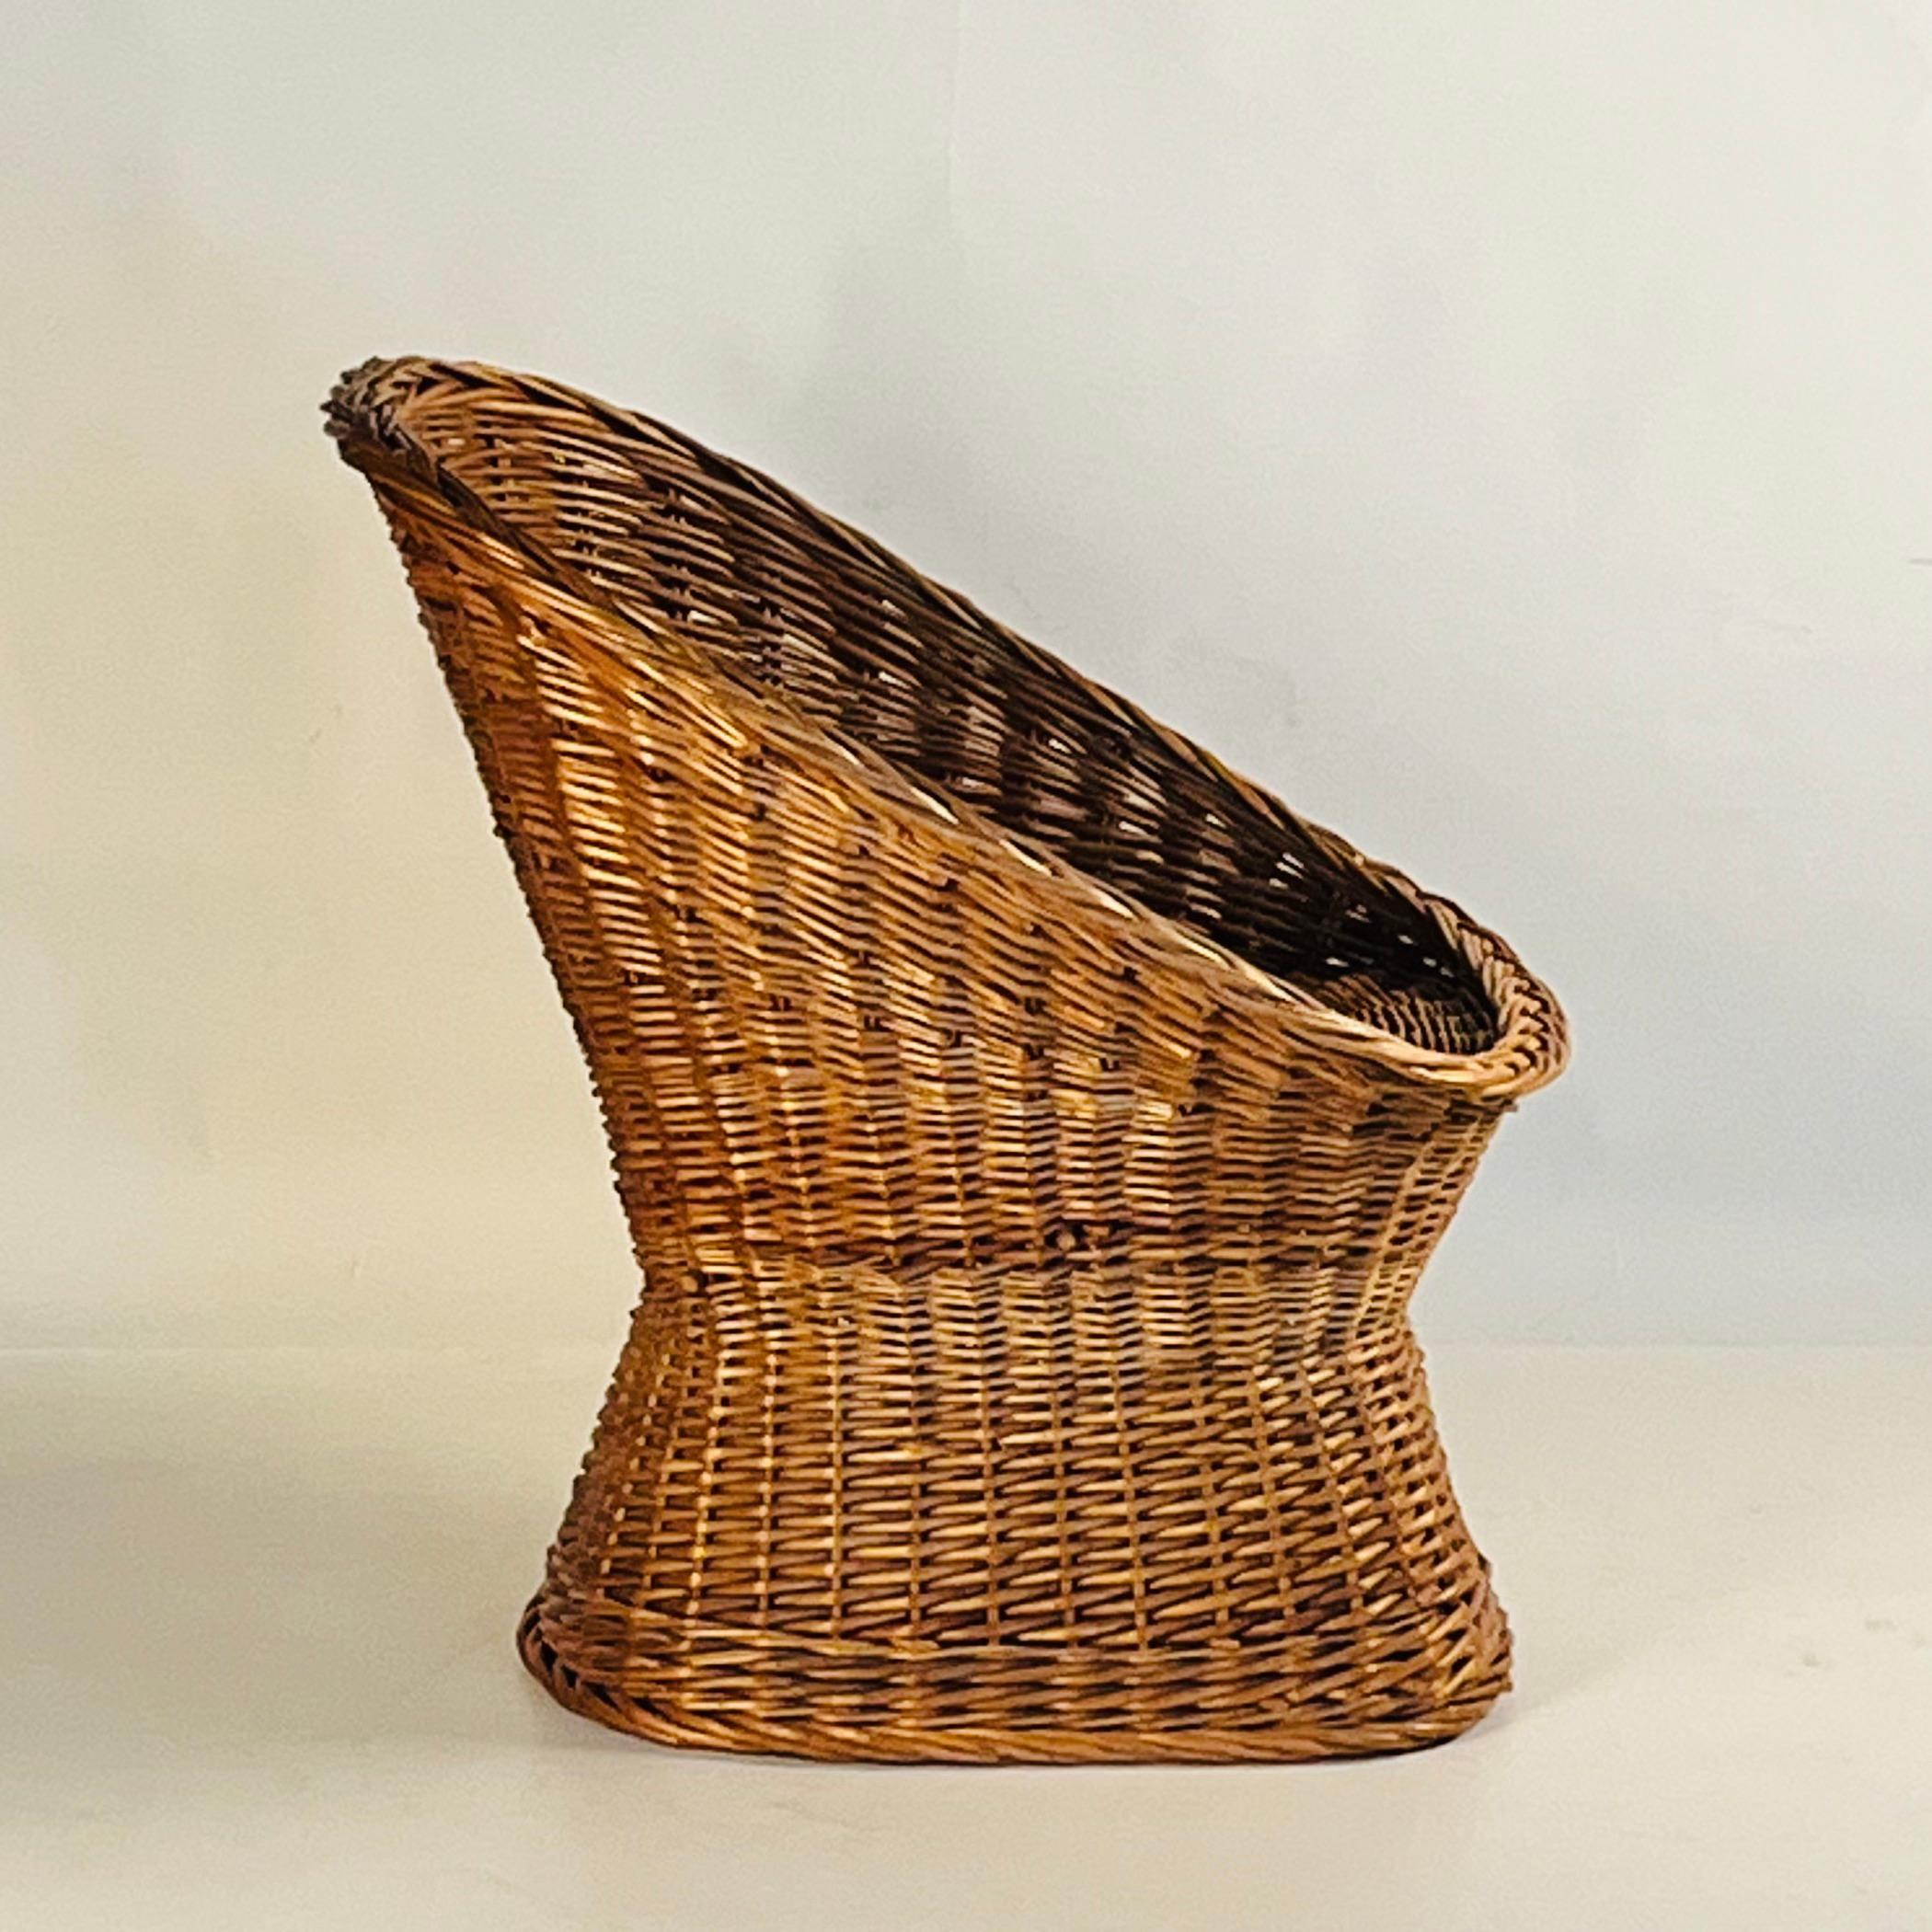 Woven Rattan Wicker Barrel Chair with Shearling Pad For Sale 1